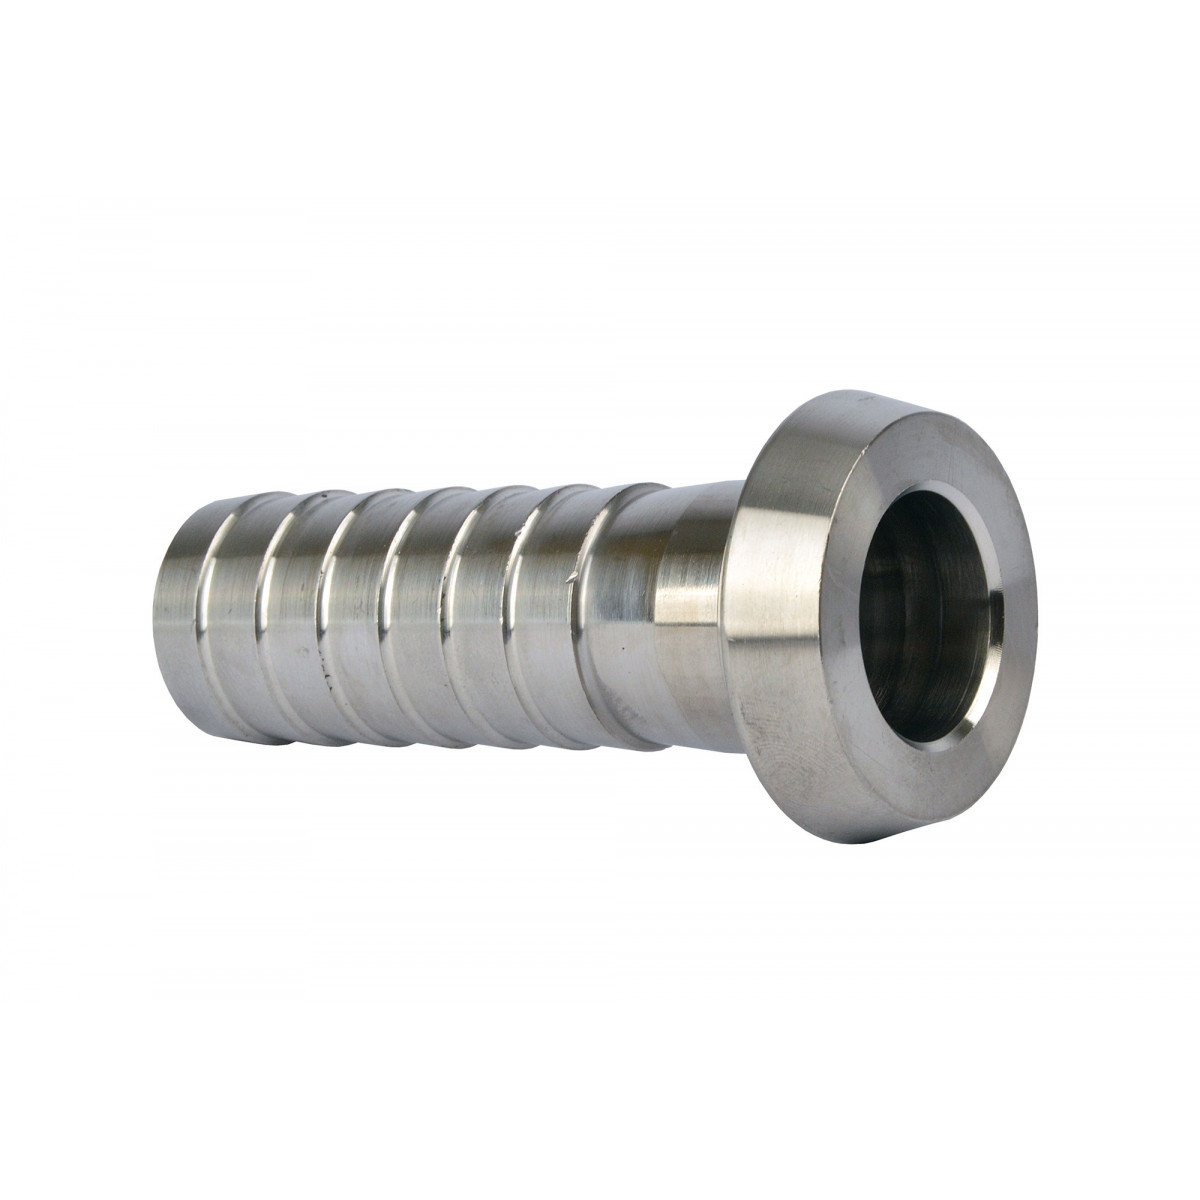 Embout tuyau 26,9 mm x DIN 25 douille • Brouwland